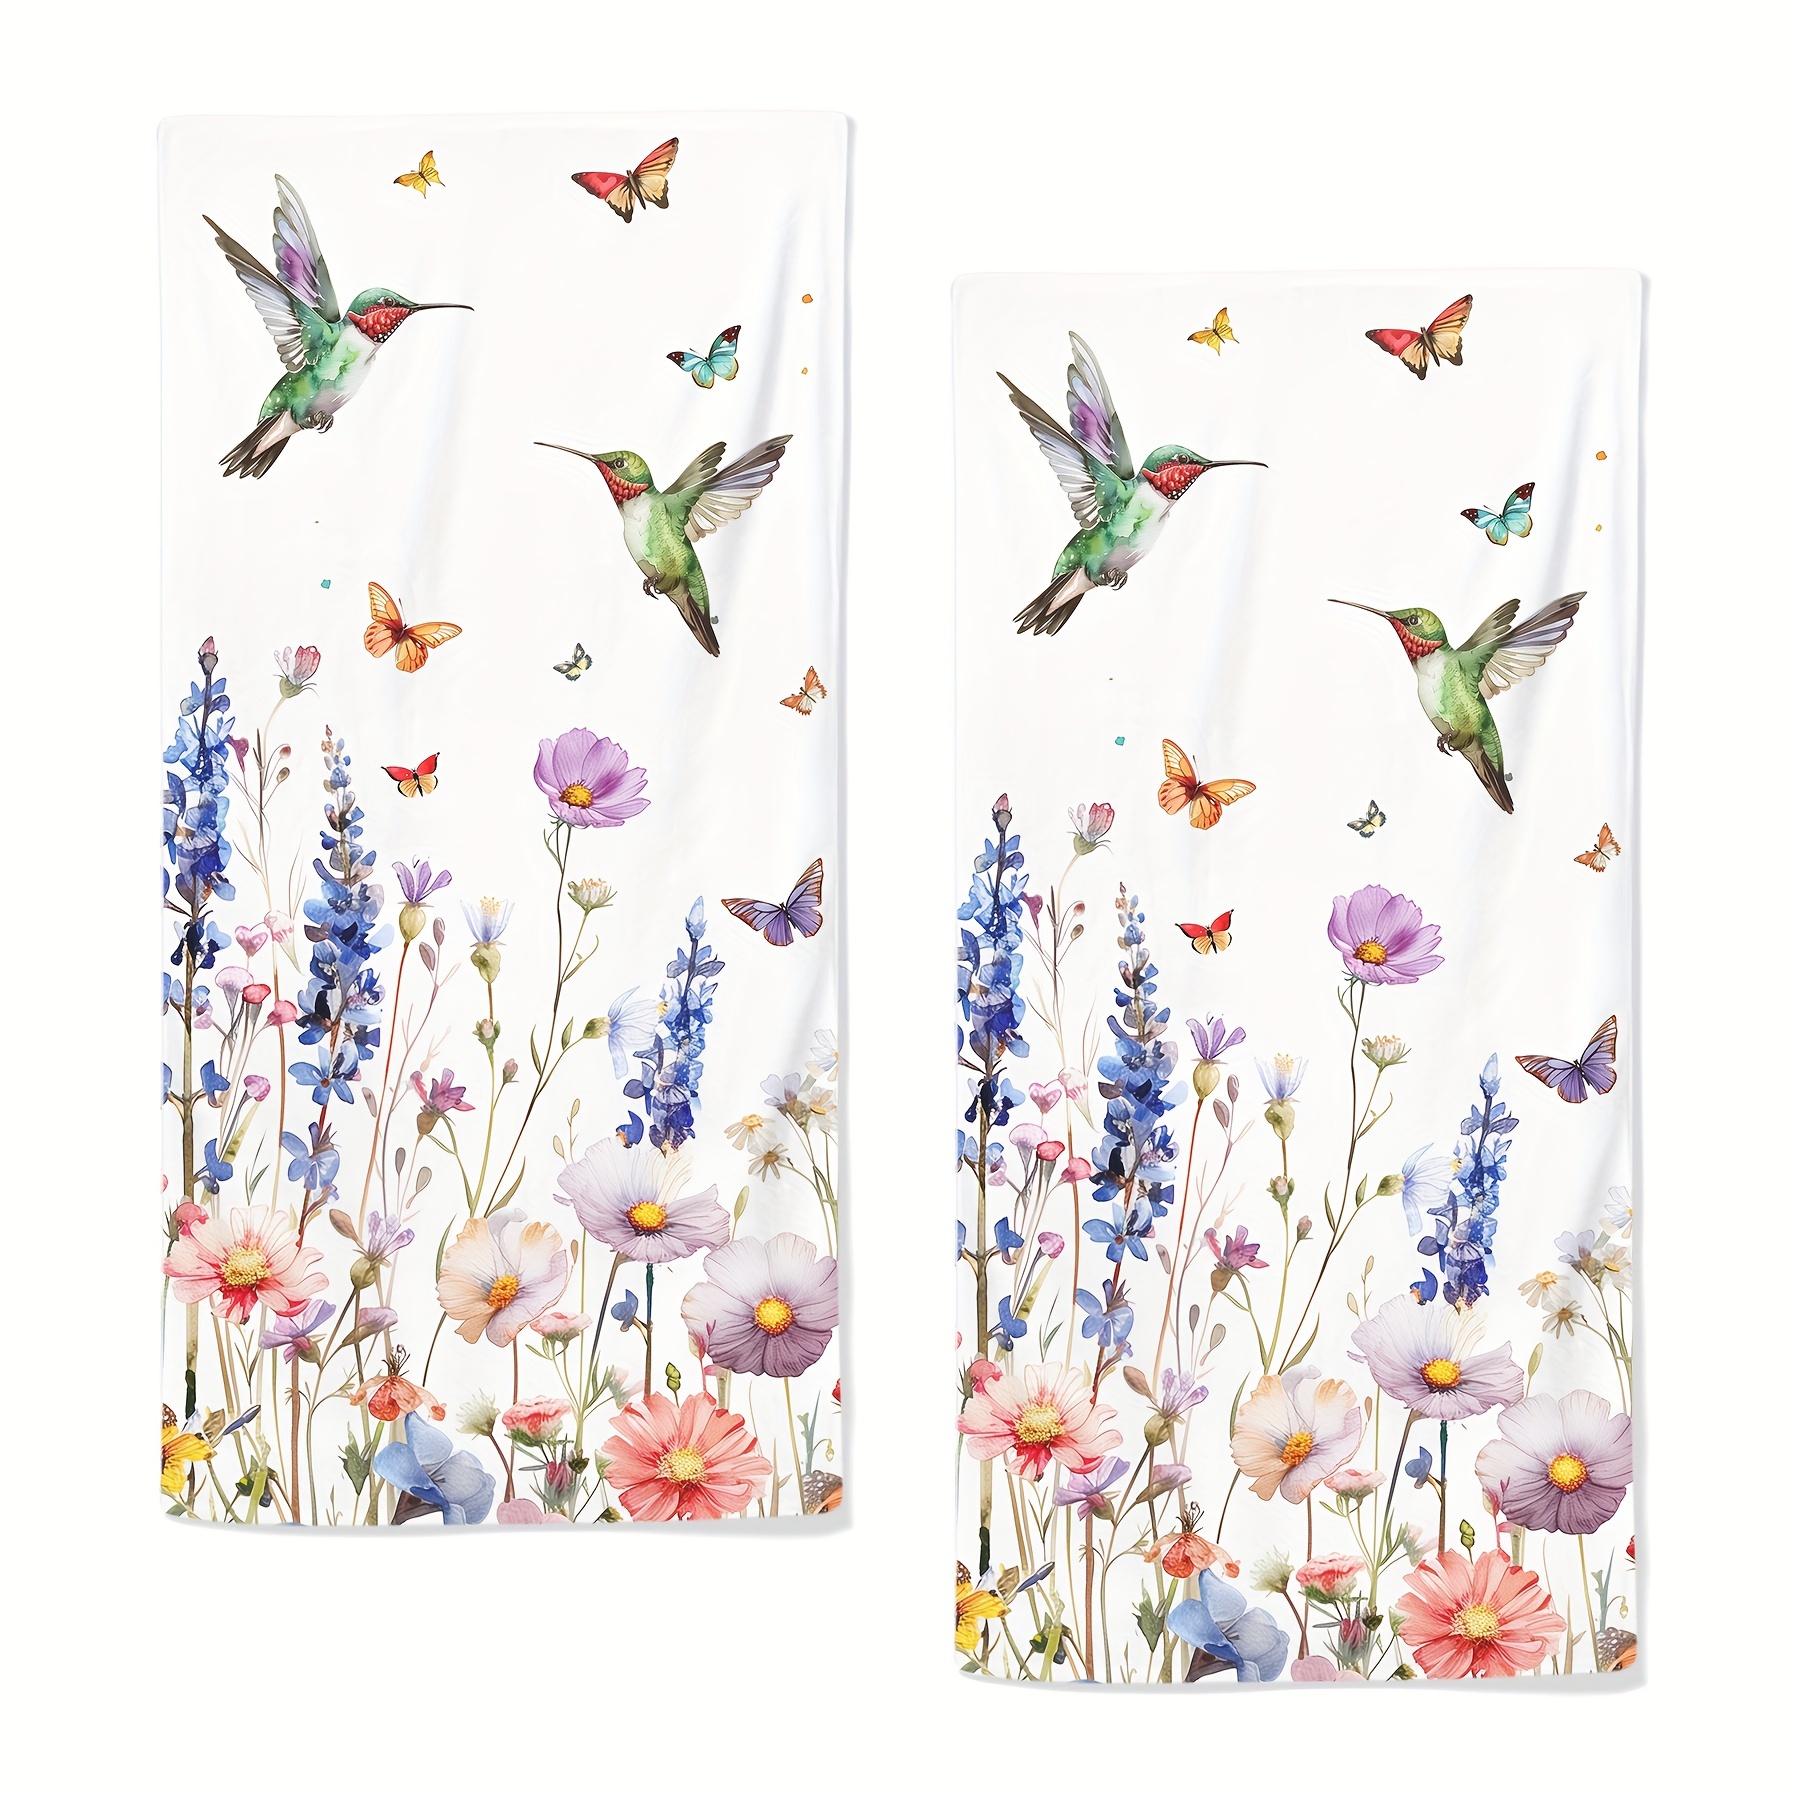 

Bird Kitchen Towels Set Of 2 - Hummingbird Kitchen Towels 2 Pcs 13.7"x28.7" Bird Kitchen Towels Bathroom, Kitchen, And Spa Modern Decor For Home Decor Gift